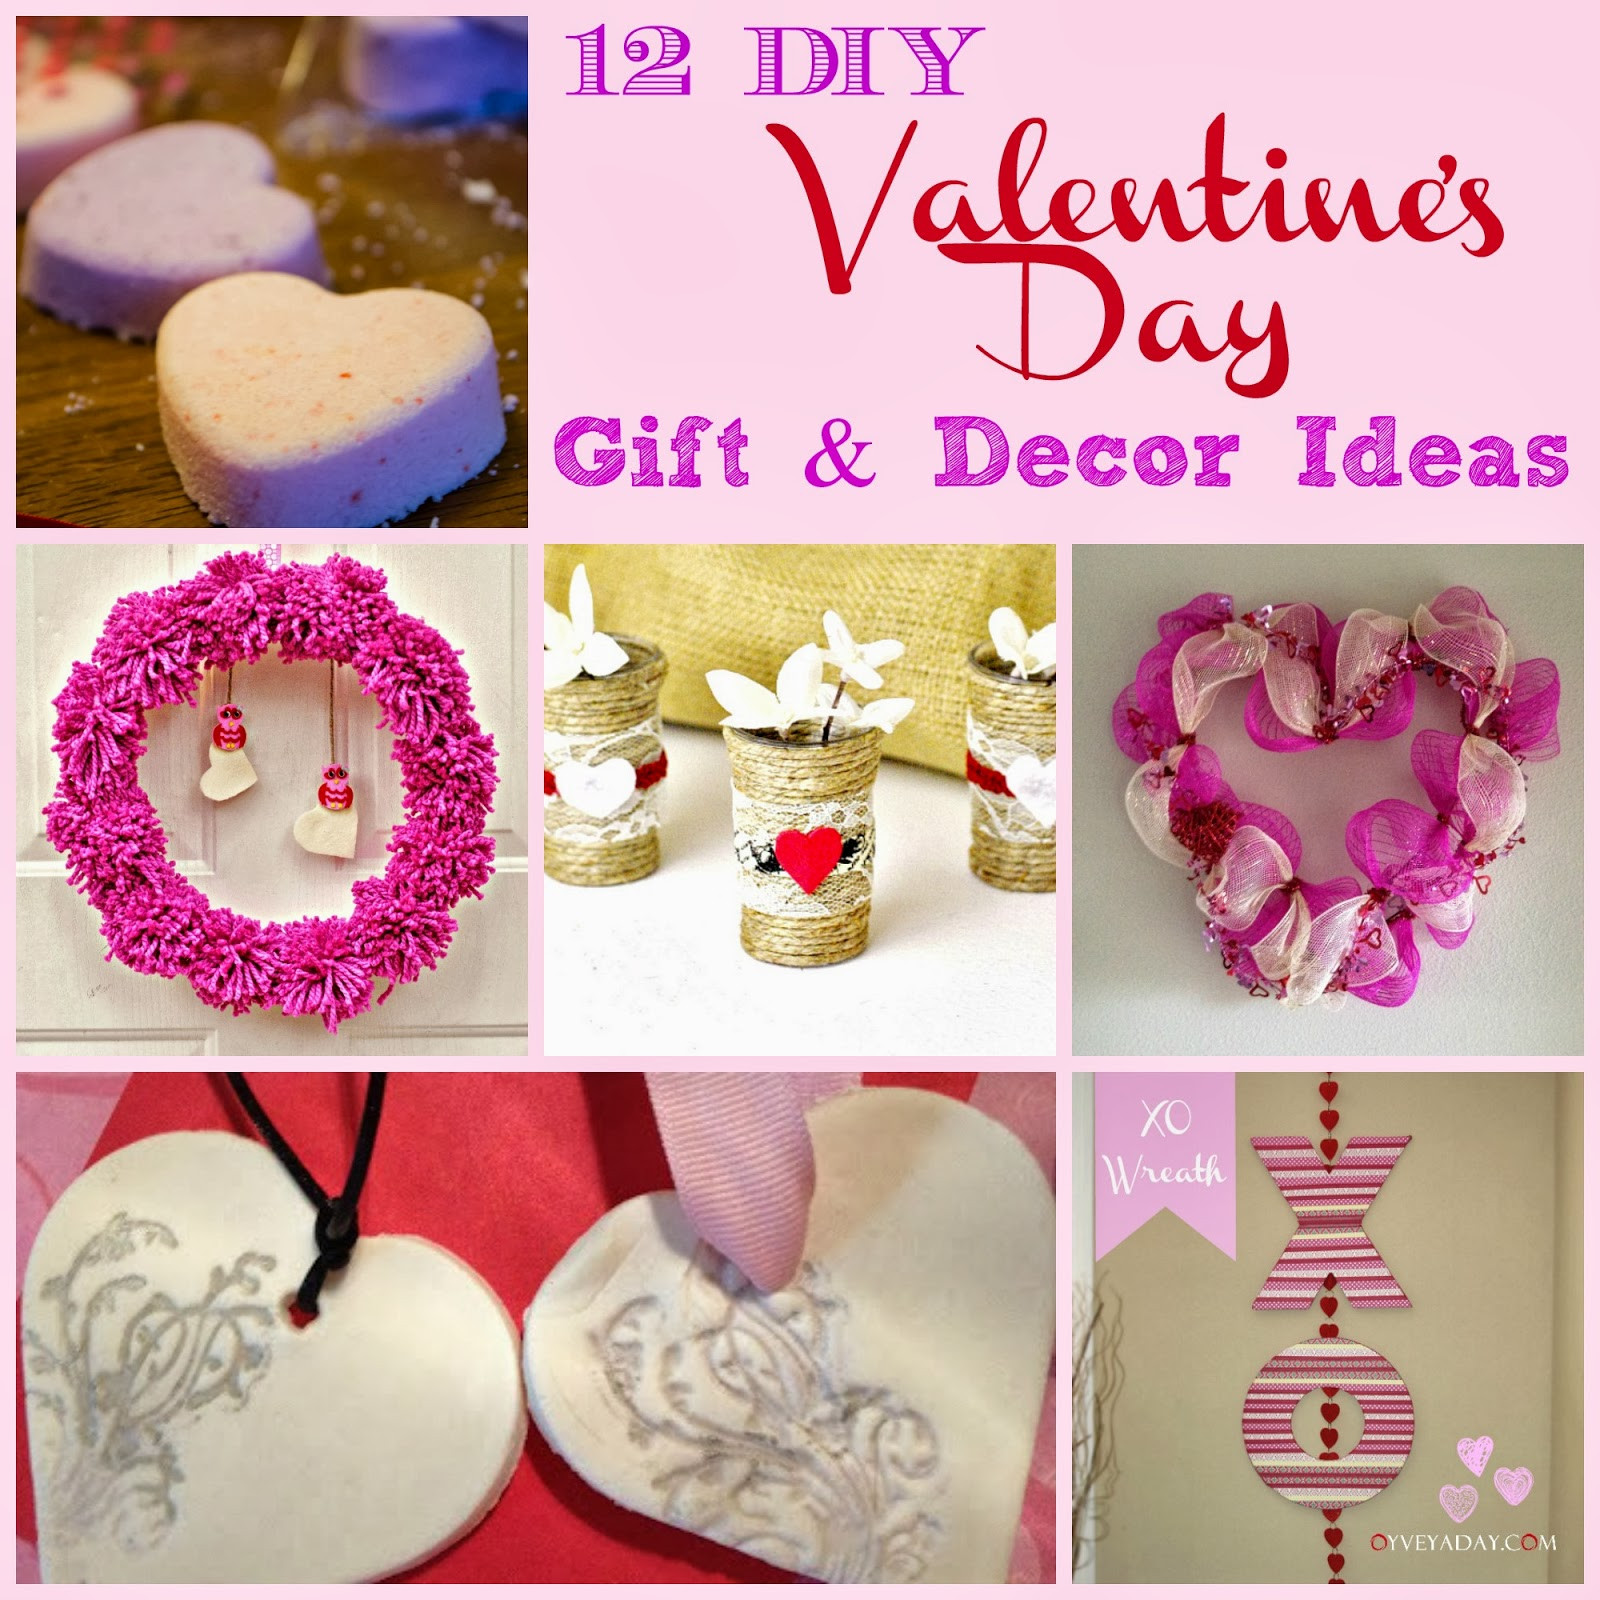 Homemade Valentine Gift Ideas
 12 DIY Valentine s Day Gift & Decor Ideas Outnumbered 3 to 1